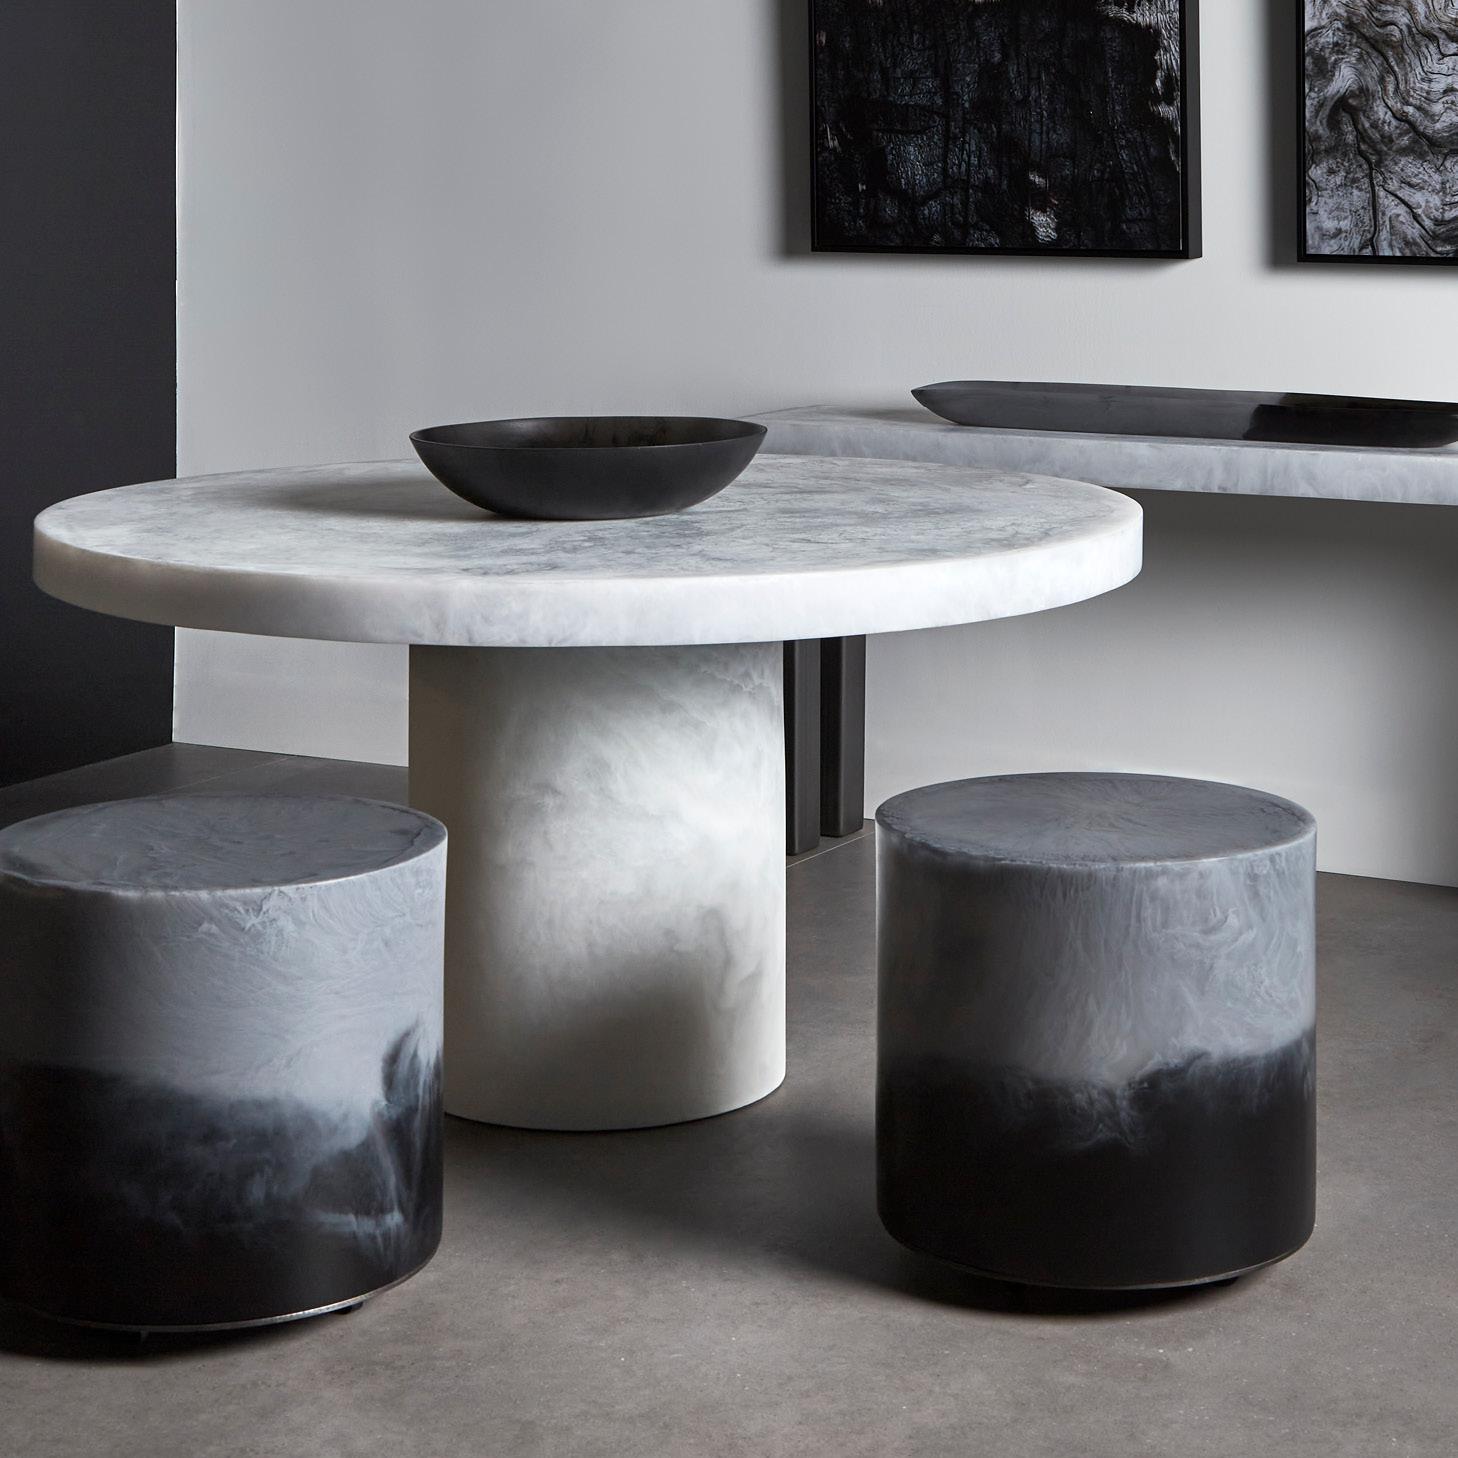 Studio Sturdy Chief Round Side Table – Charcoal & Soft Grey Marble Resin In New Condition For Sale In Vancouver, CA